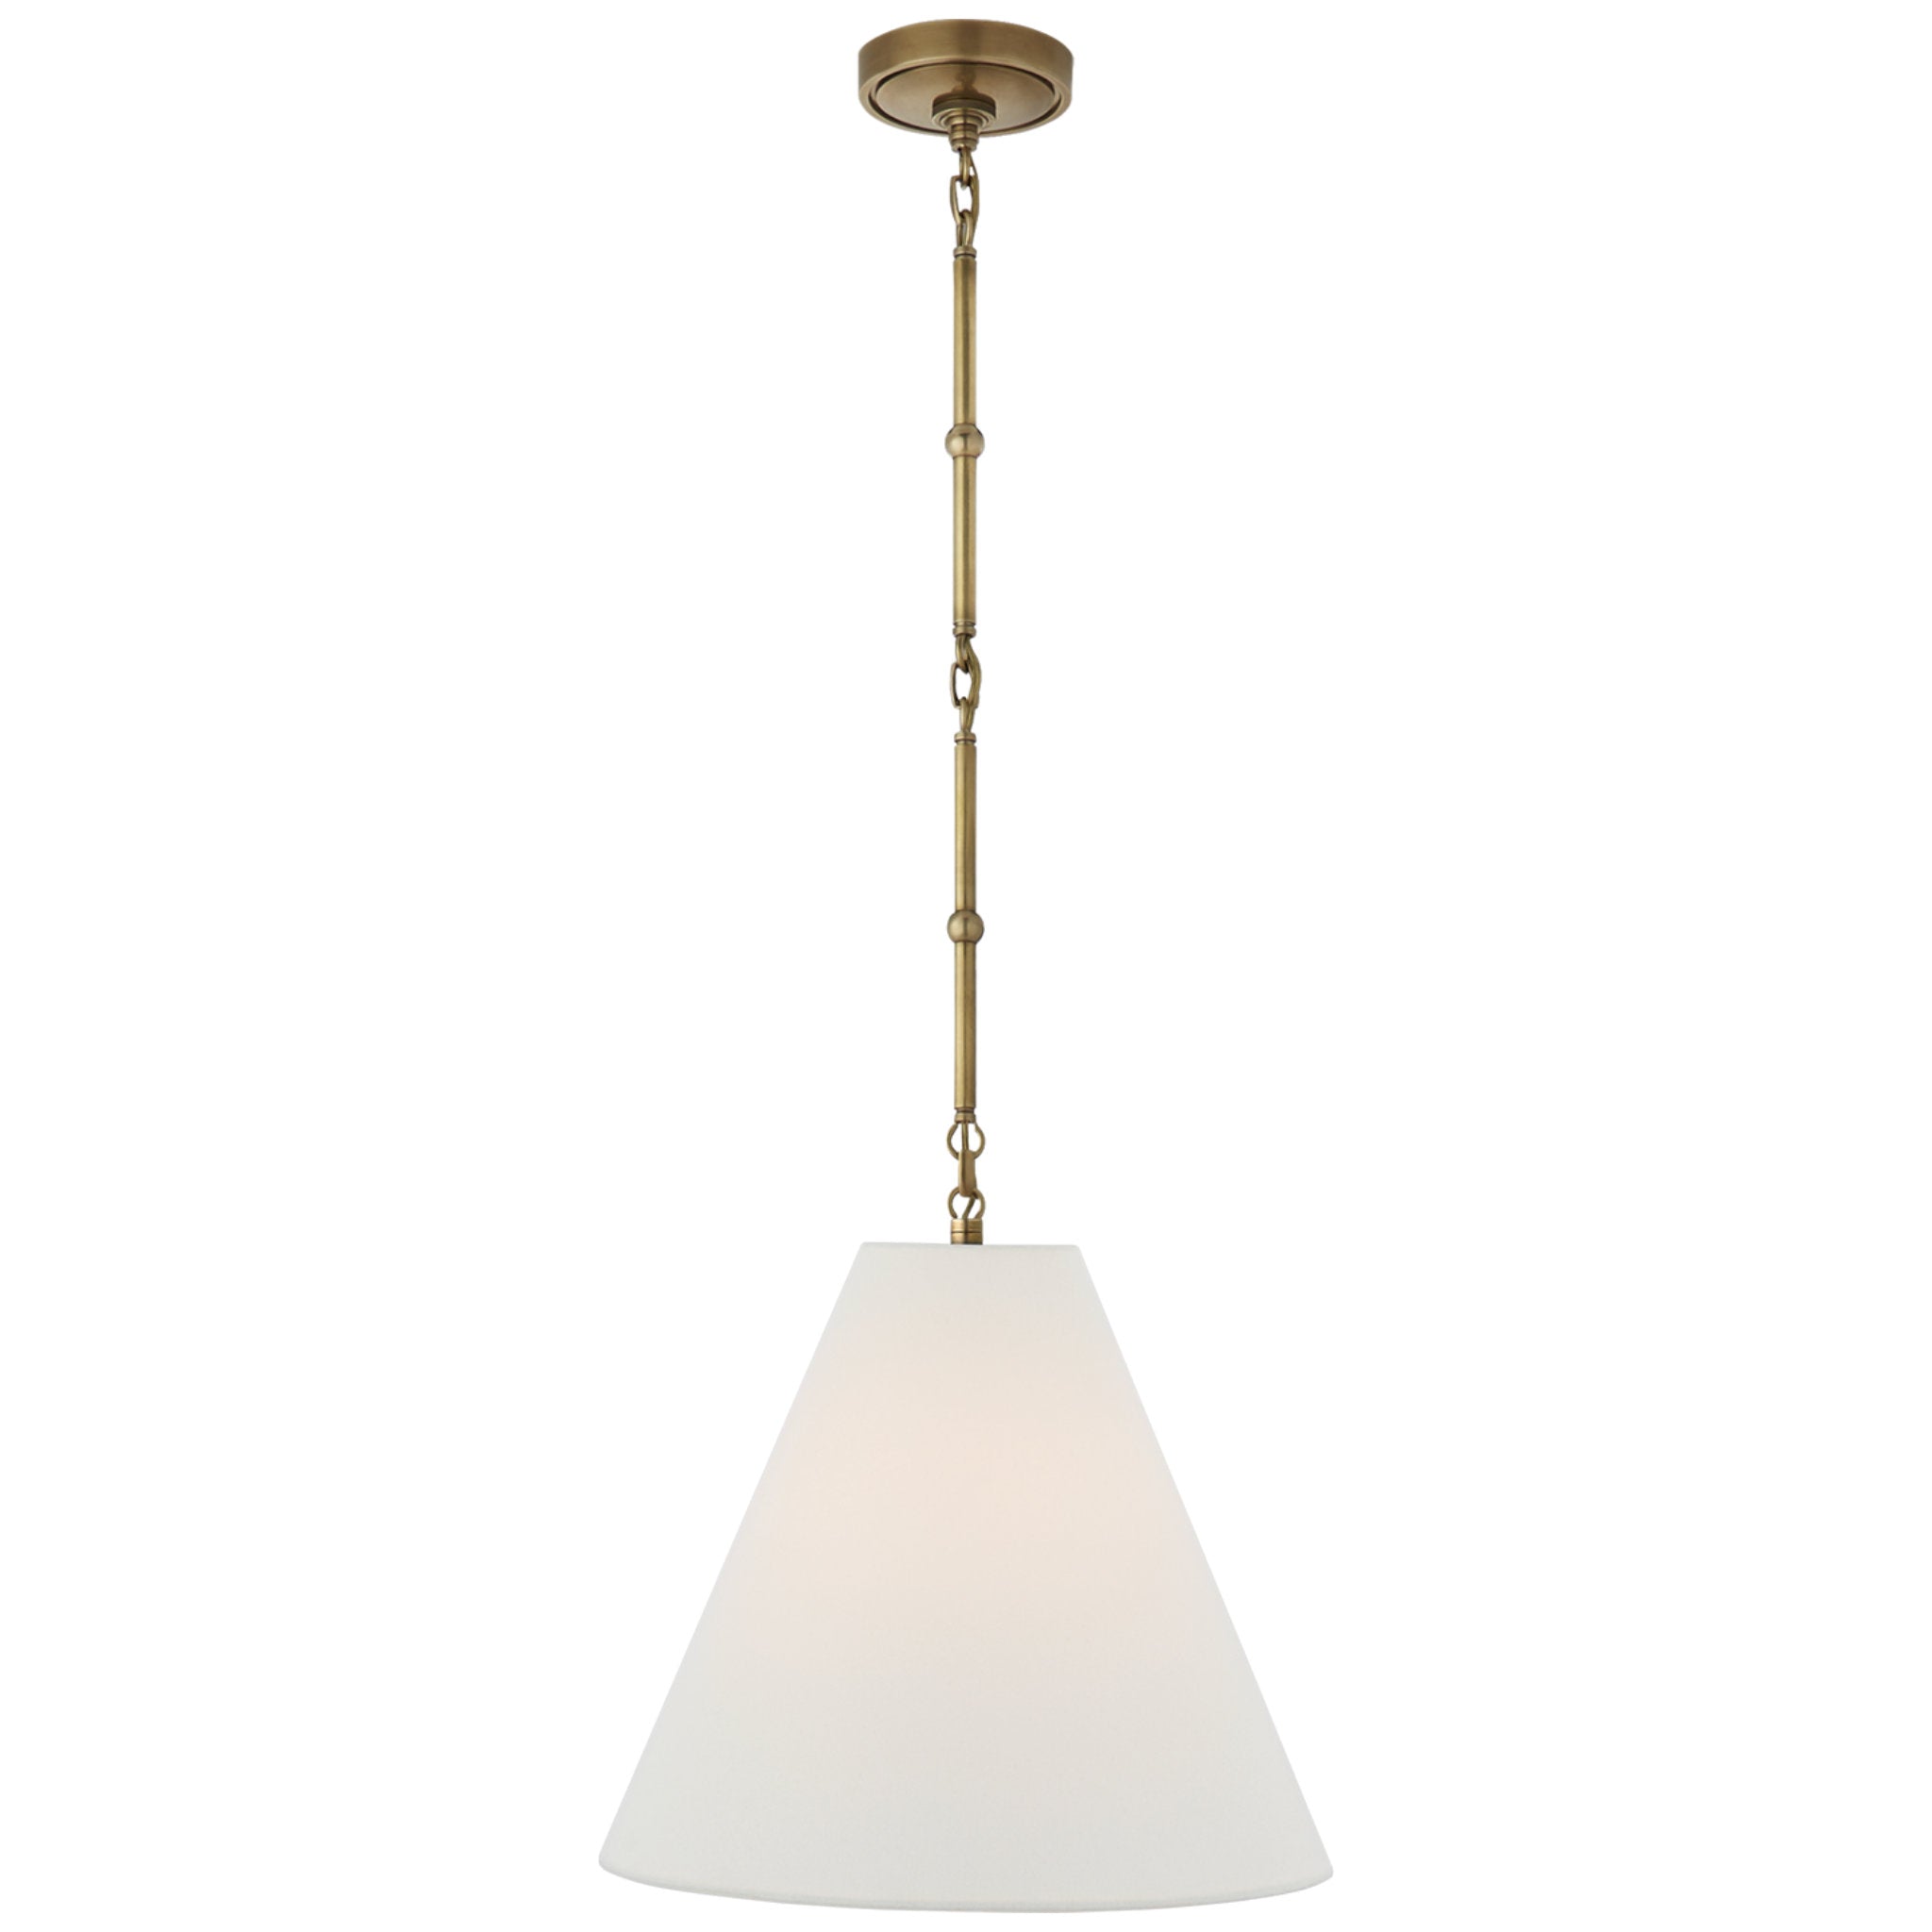 Thomas O'Brien Goodman Small Hanging Light in Hand-Rubbed Antique Brass with Linen Shade